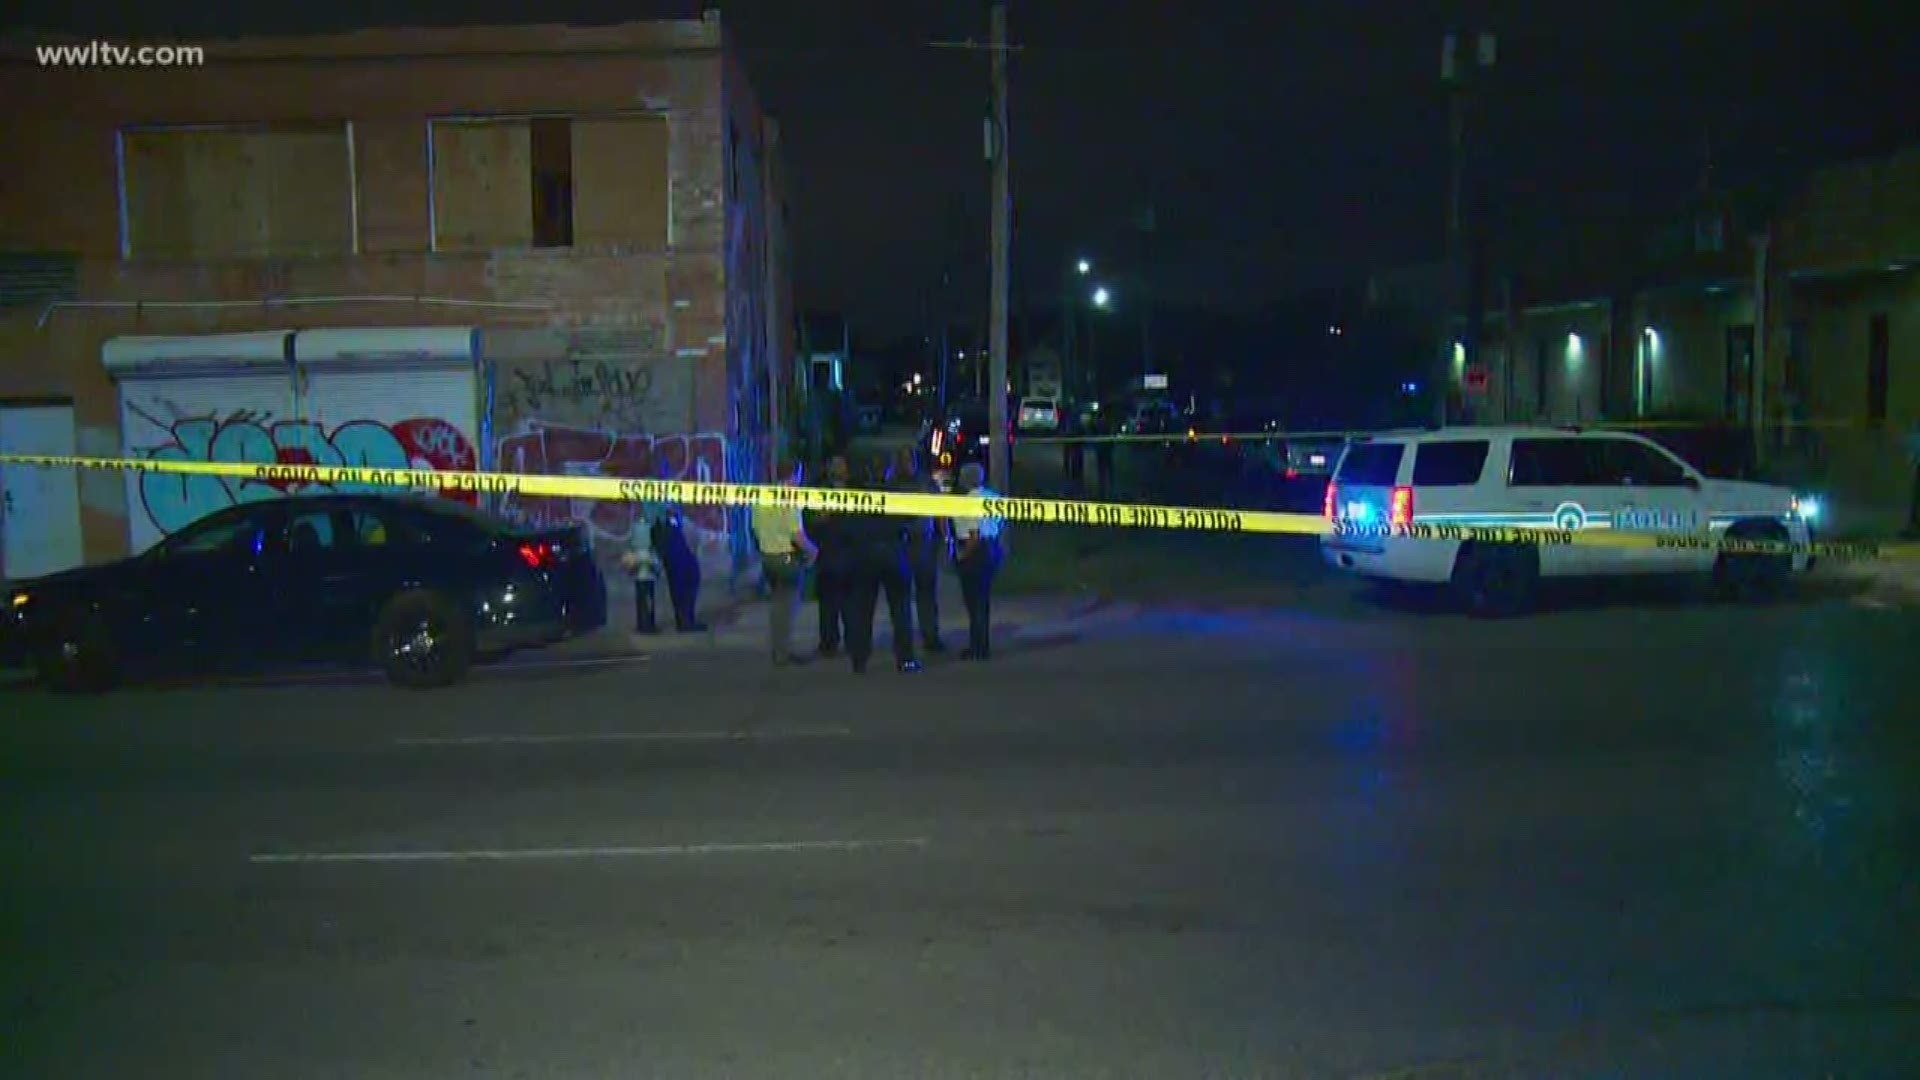 The New Orleans Police Department says the shooting happened around 9:53 p.m. in the 2700 block of Cleveland Avenue.